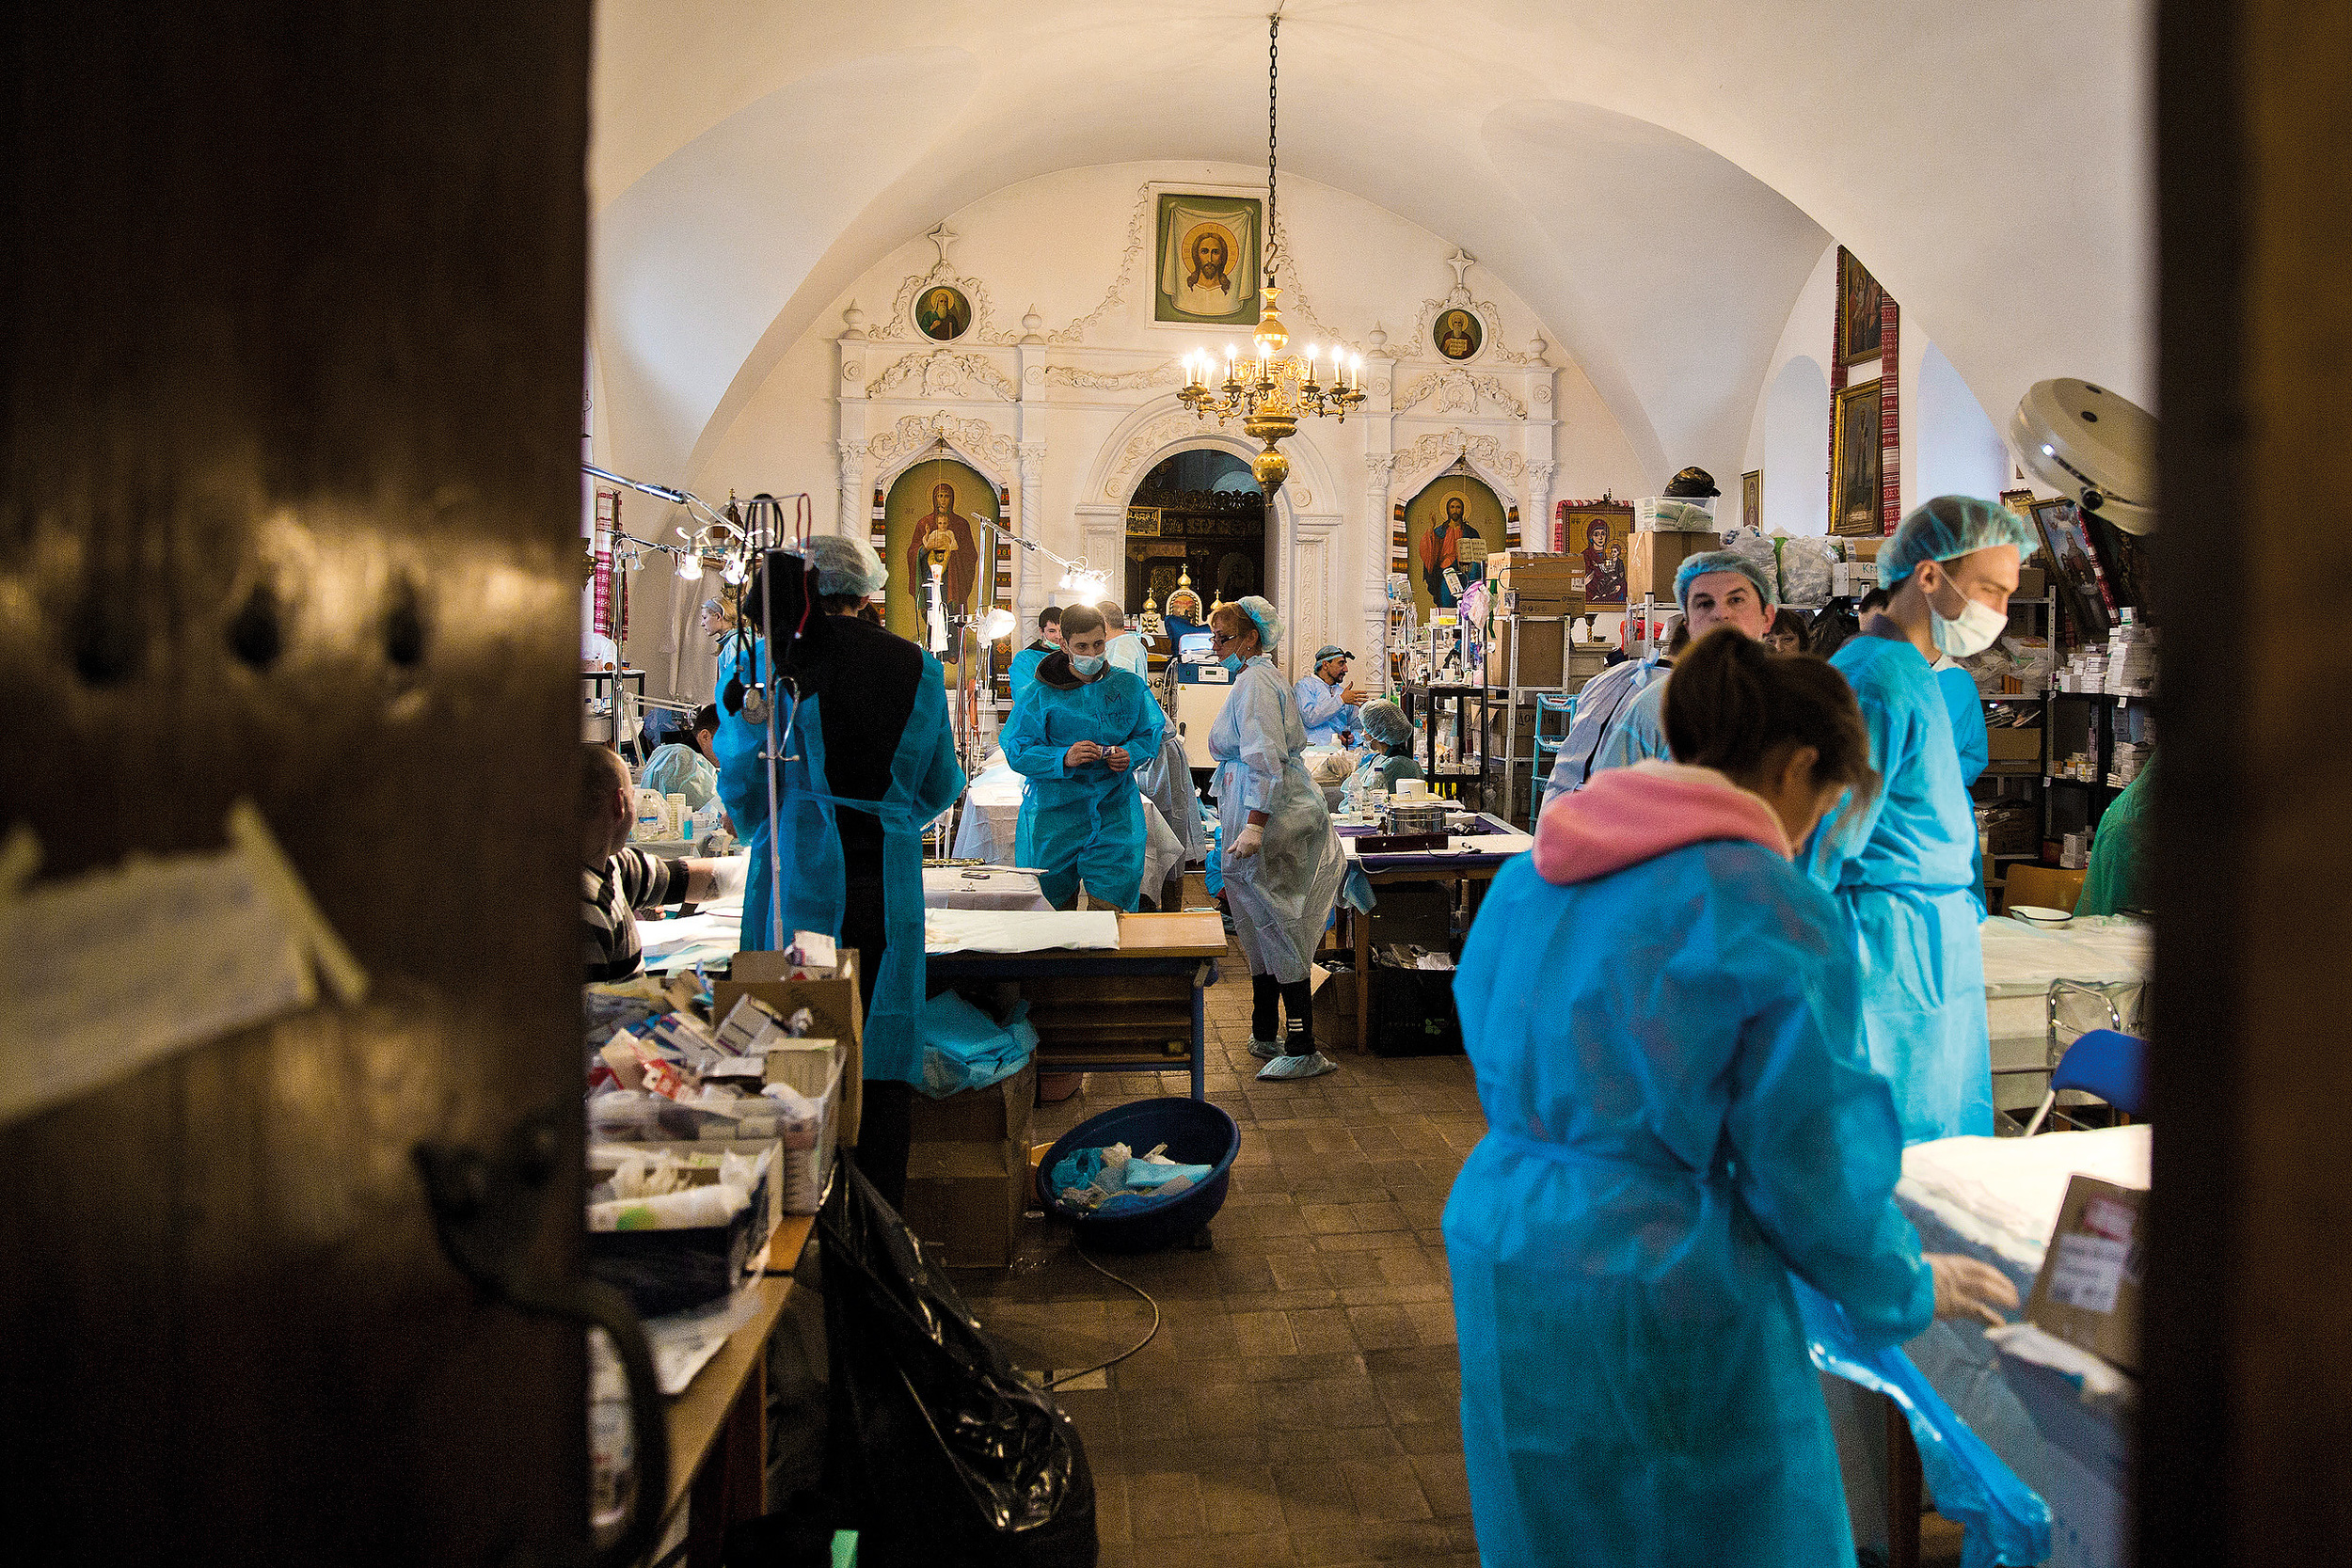  Volunteers help as doctors in the hospital organized in Kyiv's Mikhailovsky monastery after almost 100 protesters were killed with snipers' fire and hundreds were wounded 